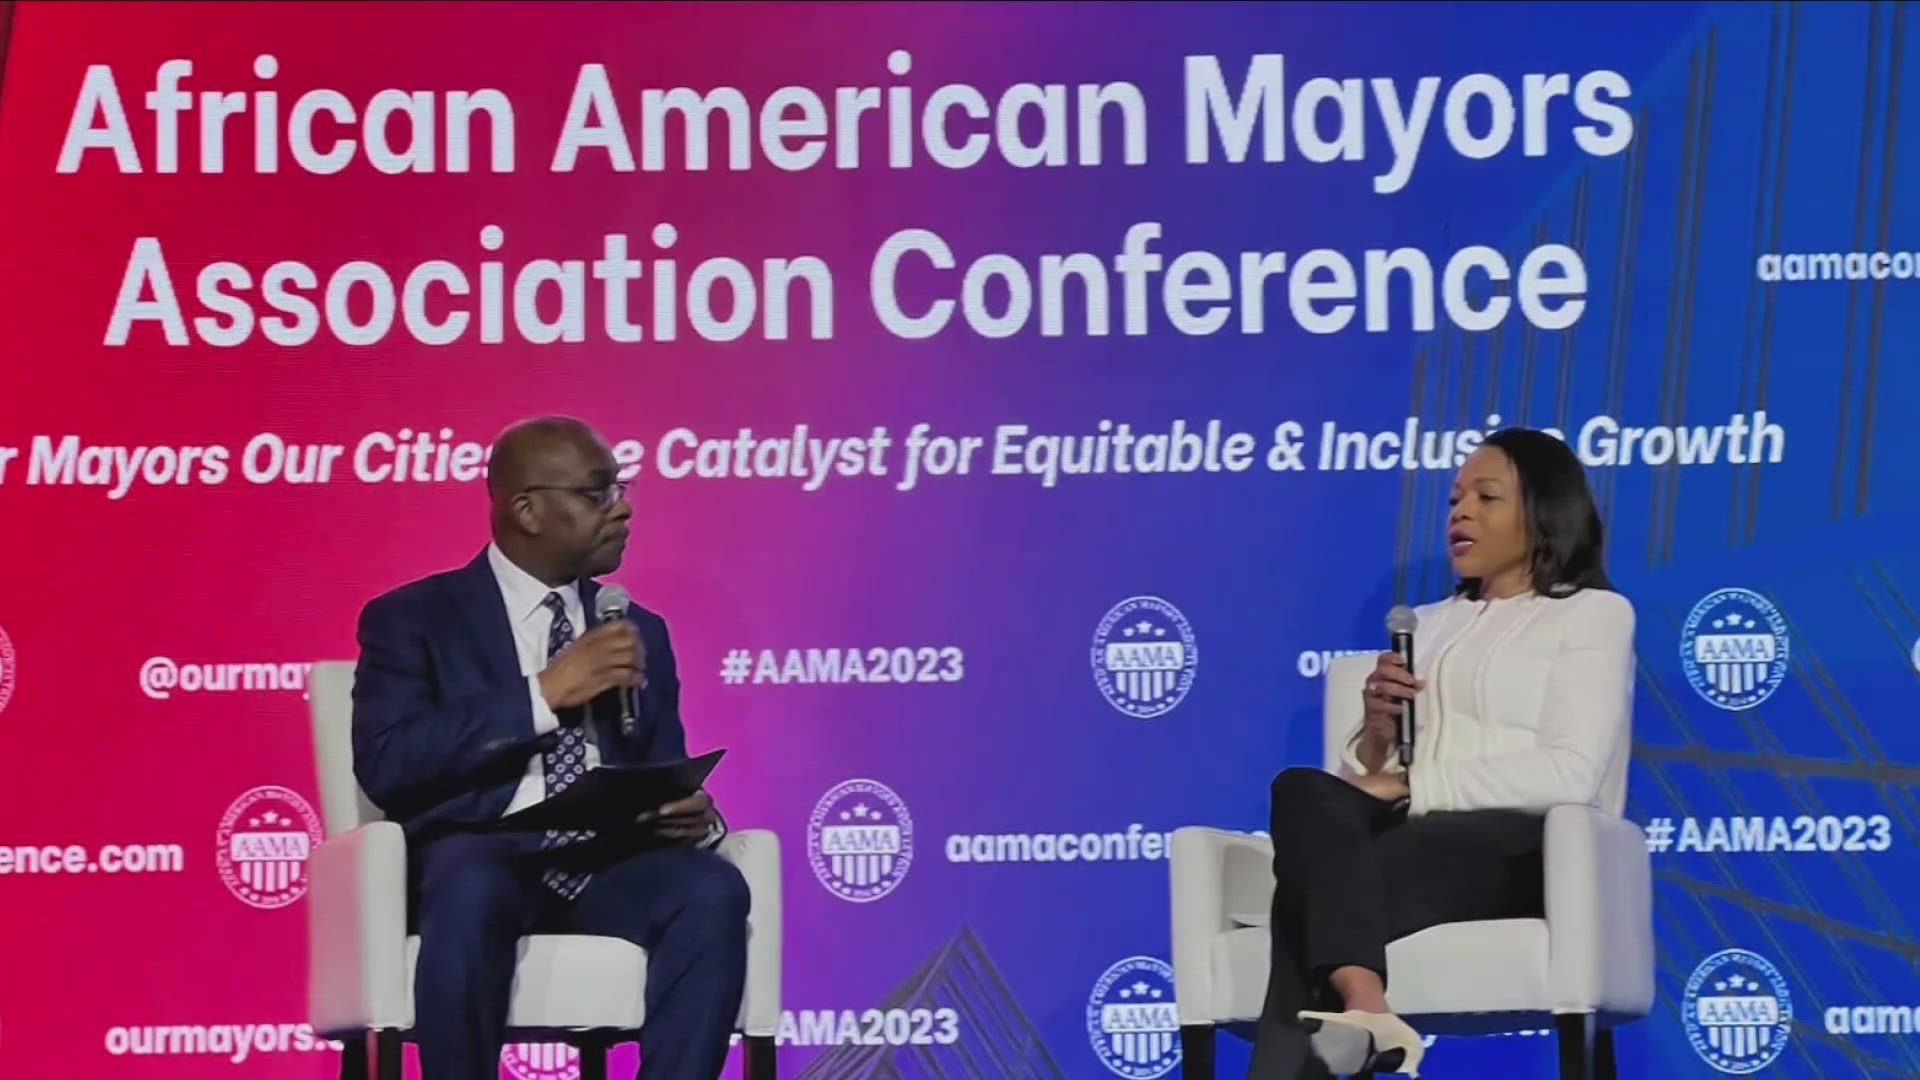 Buffalo Mayor Byron Brown on Saturday talked about his recent trip to Washington for the 9th annual African American Mayors Association Conference.